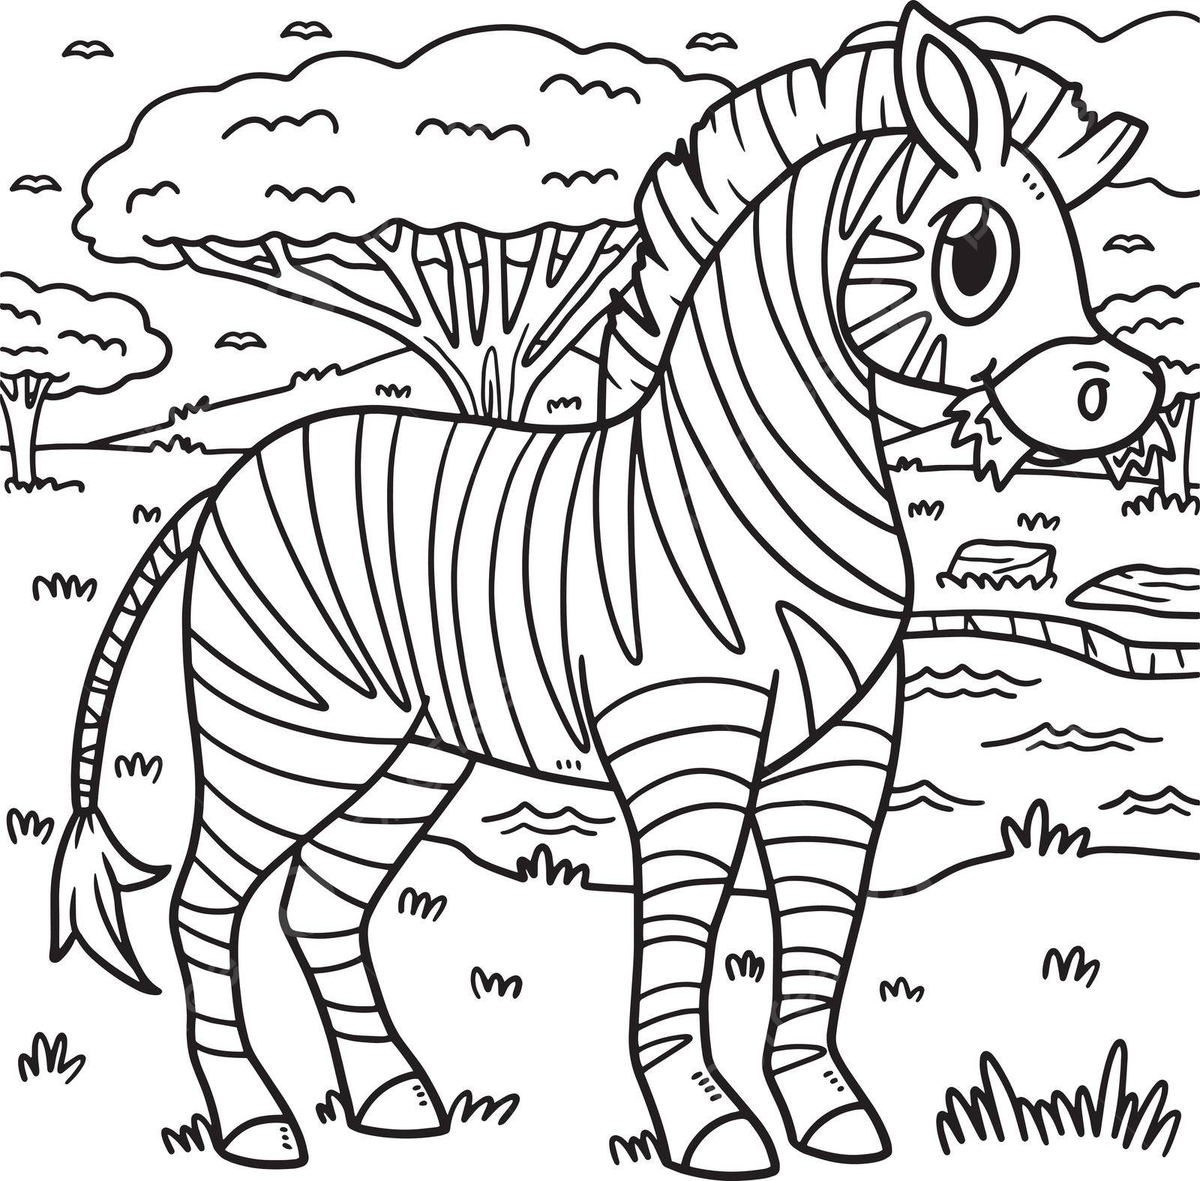 Zebra animal coloring page for kids cute colouring page colour vector animal drawing zebra drawing ring drawing png and vector with transparent background for free download